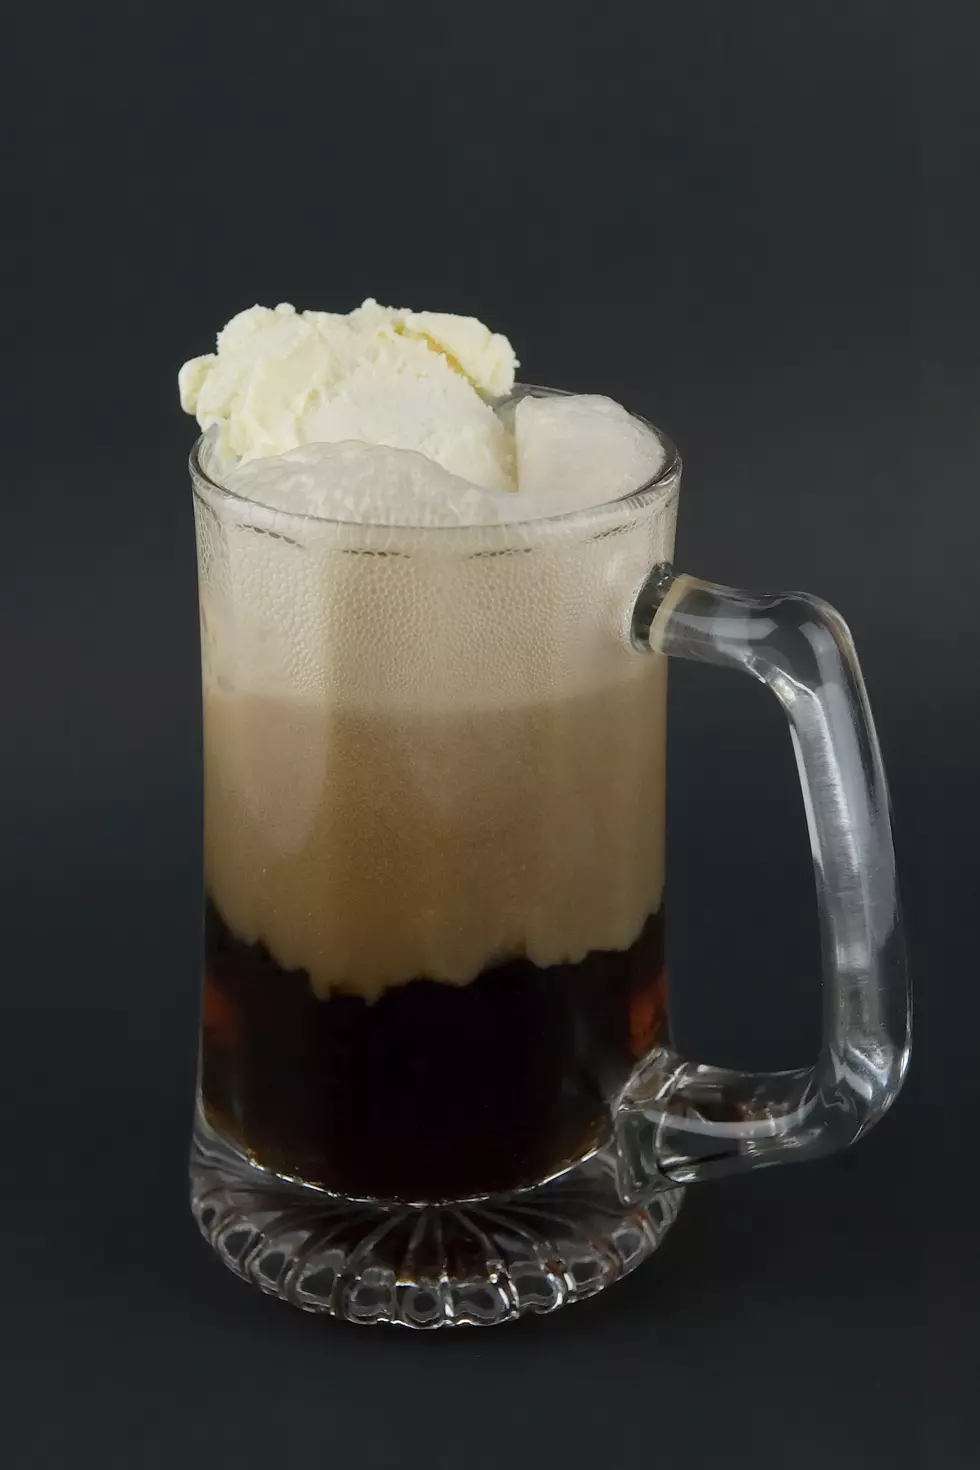 Don’t Forget To Get A FREE Root Beer Float Today!